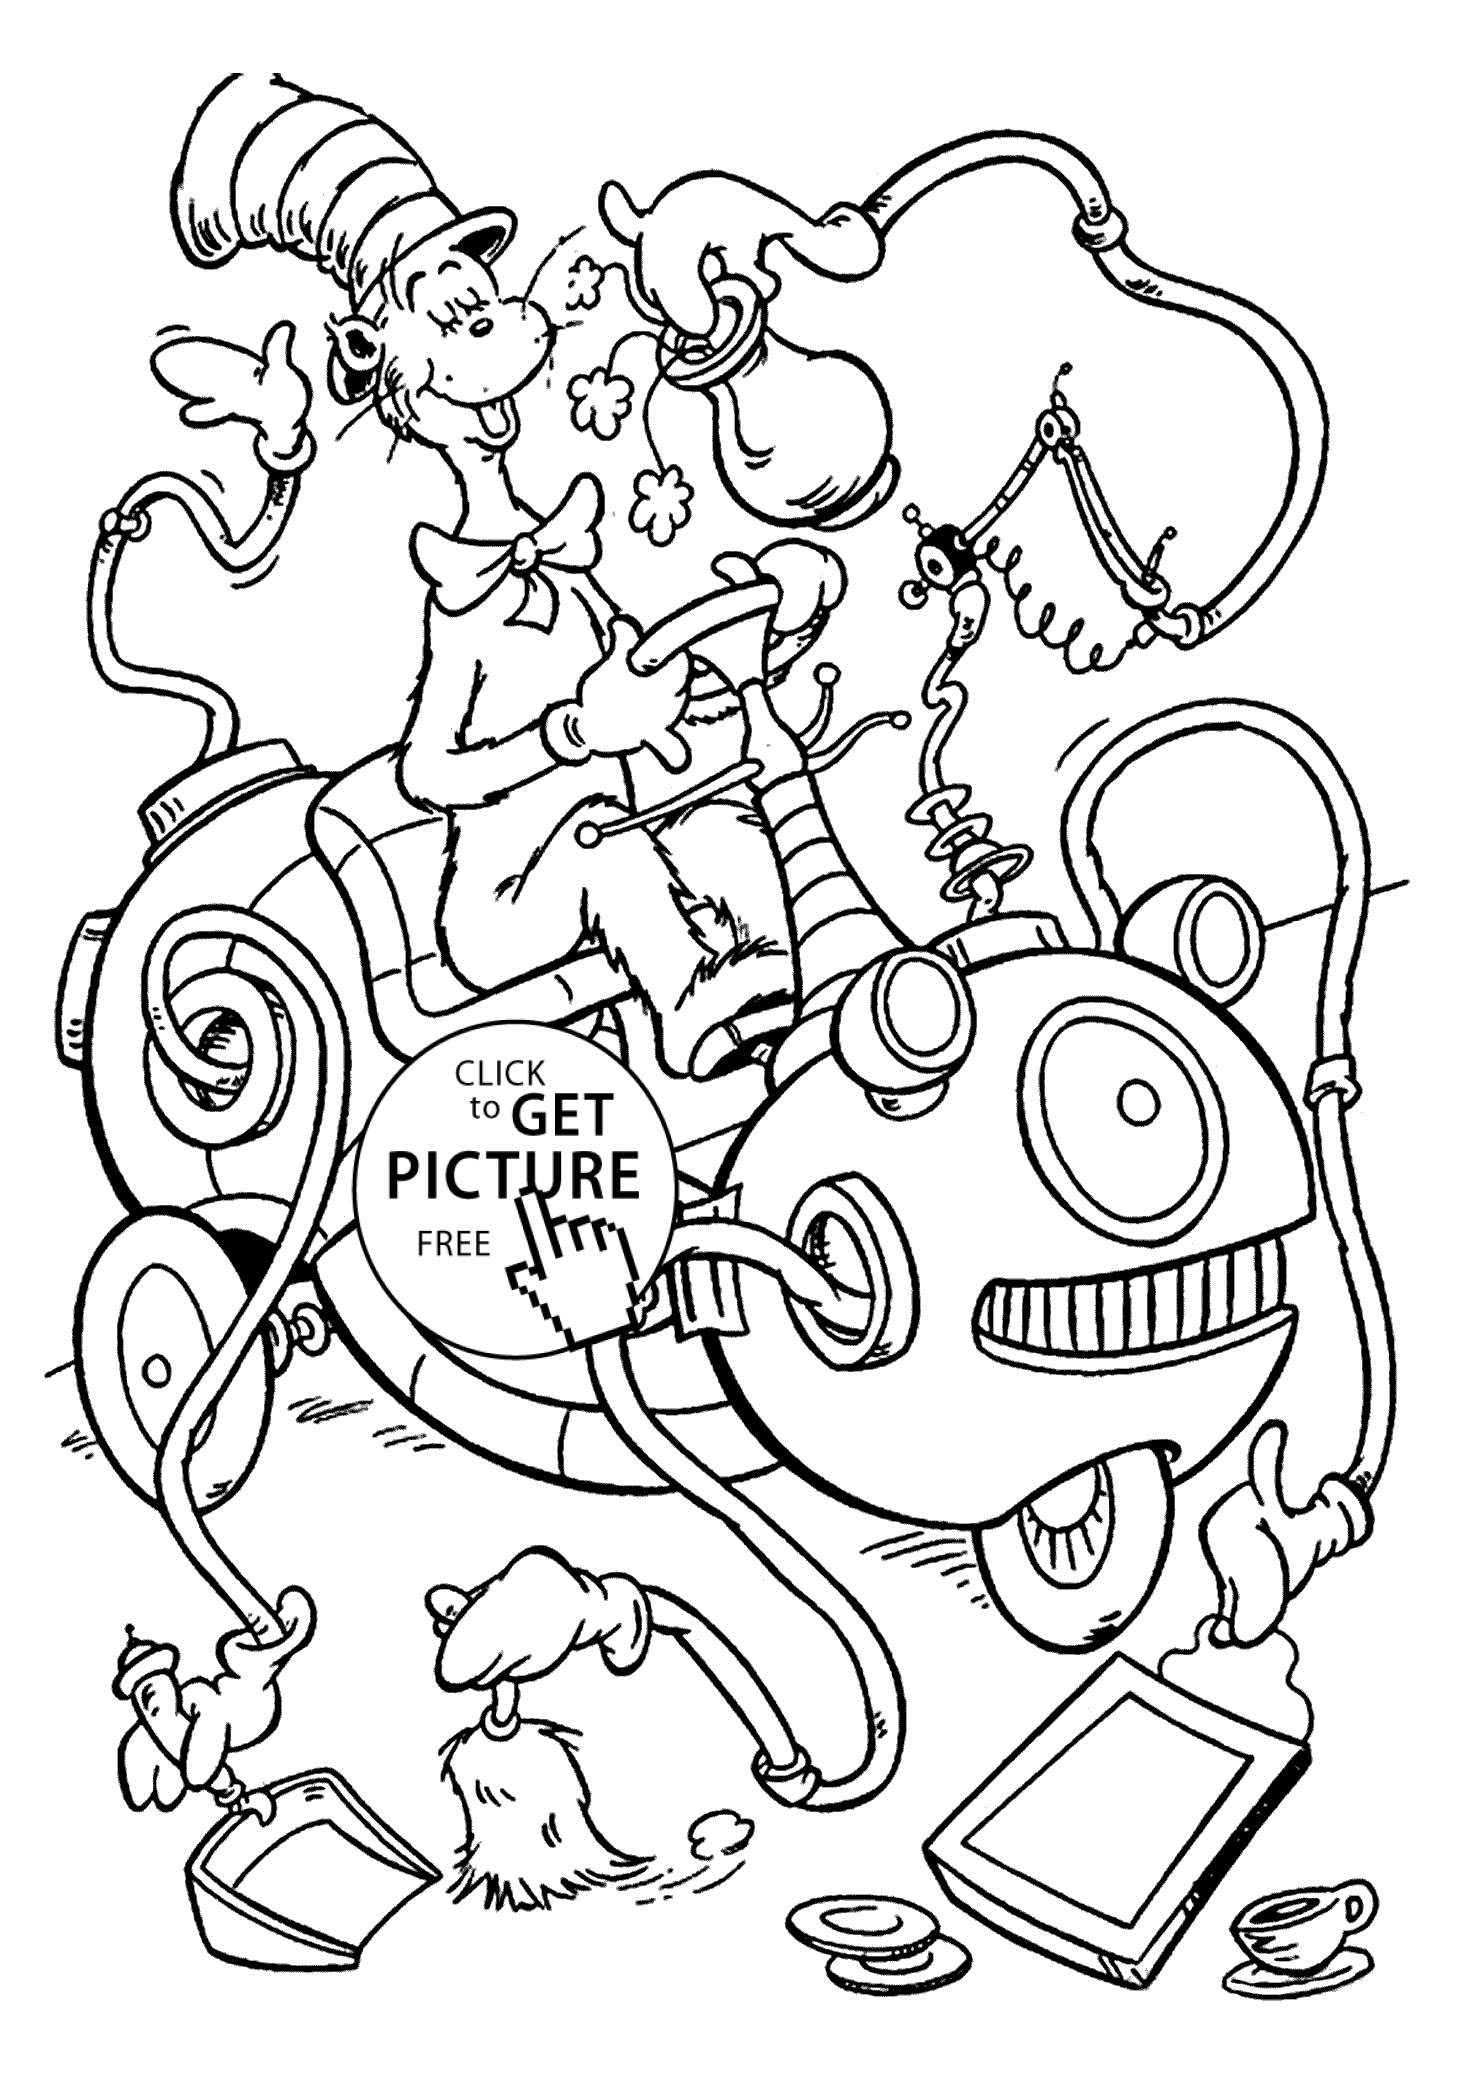 Free Dr Seuss Coloring Pages At In The Hat And Mahine Coloring Pages For Kids Printable Free